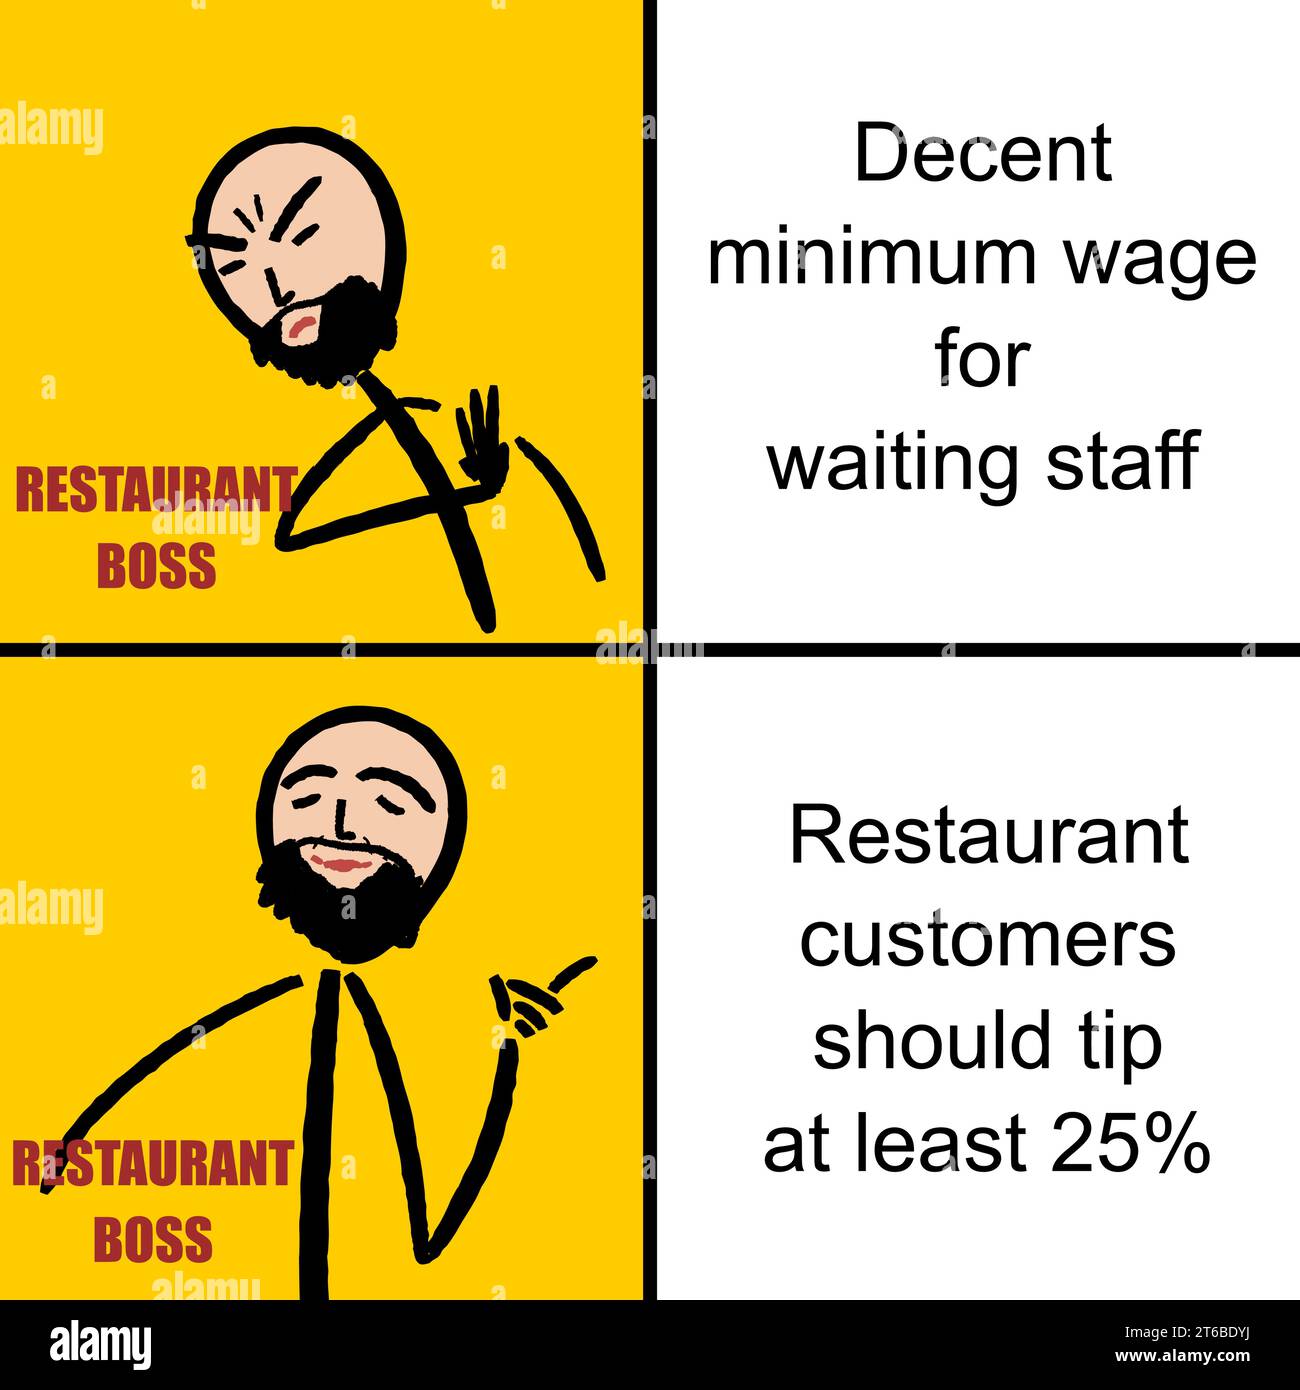 Restaurant industry and tipping culture in America. Funny meme for social media sharing. Stock Vector